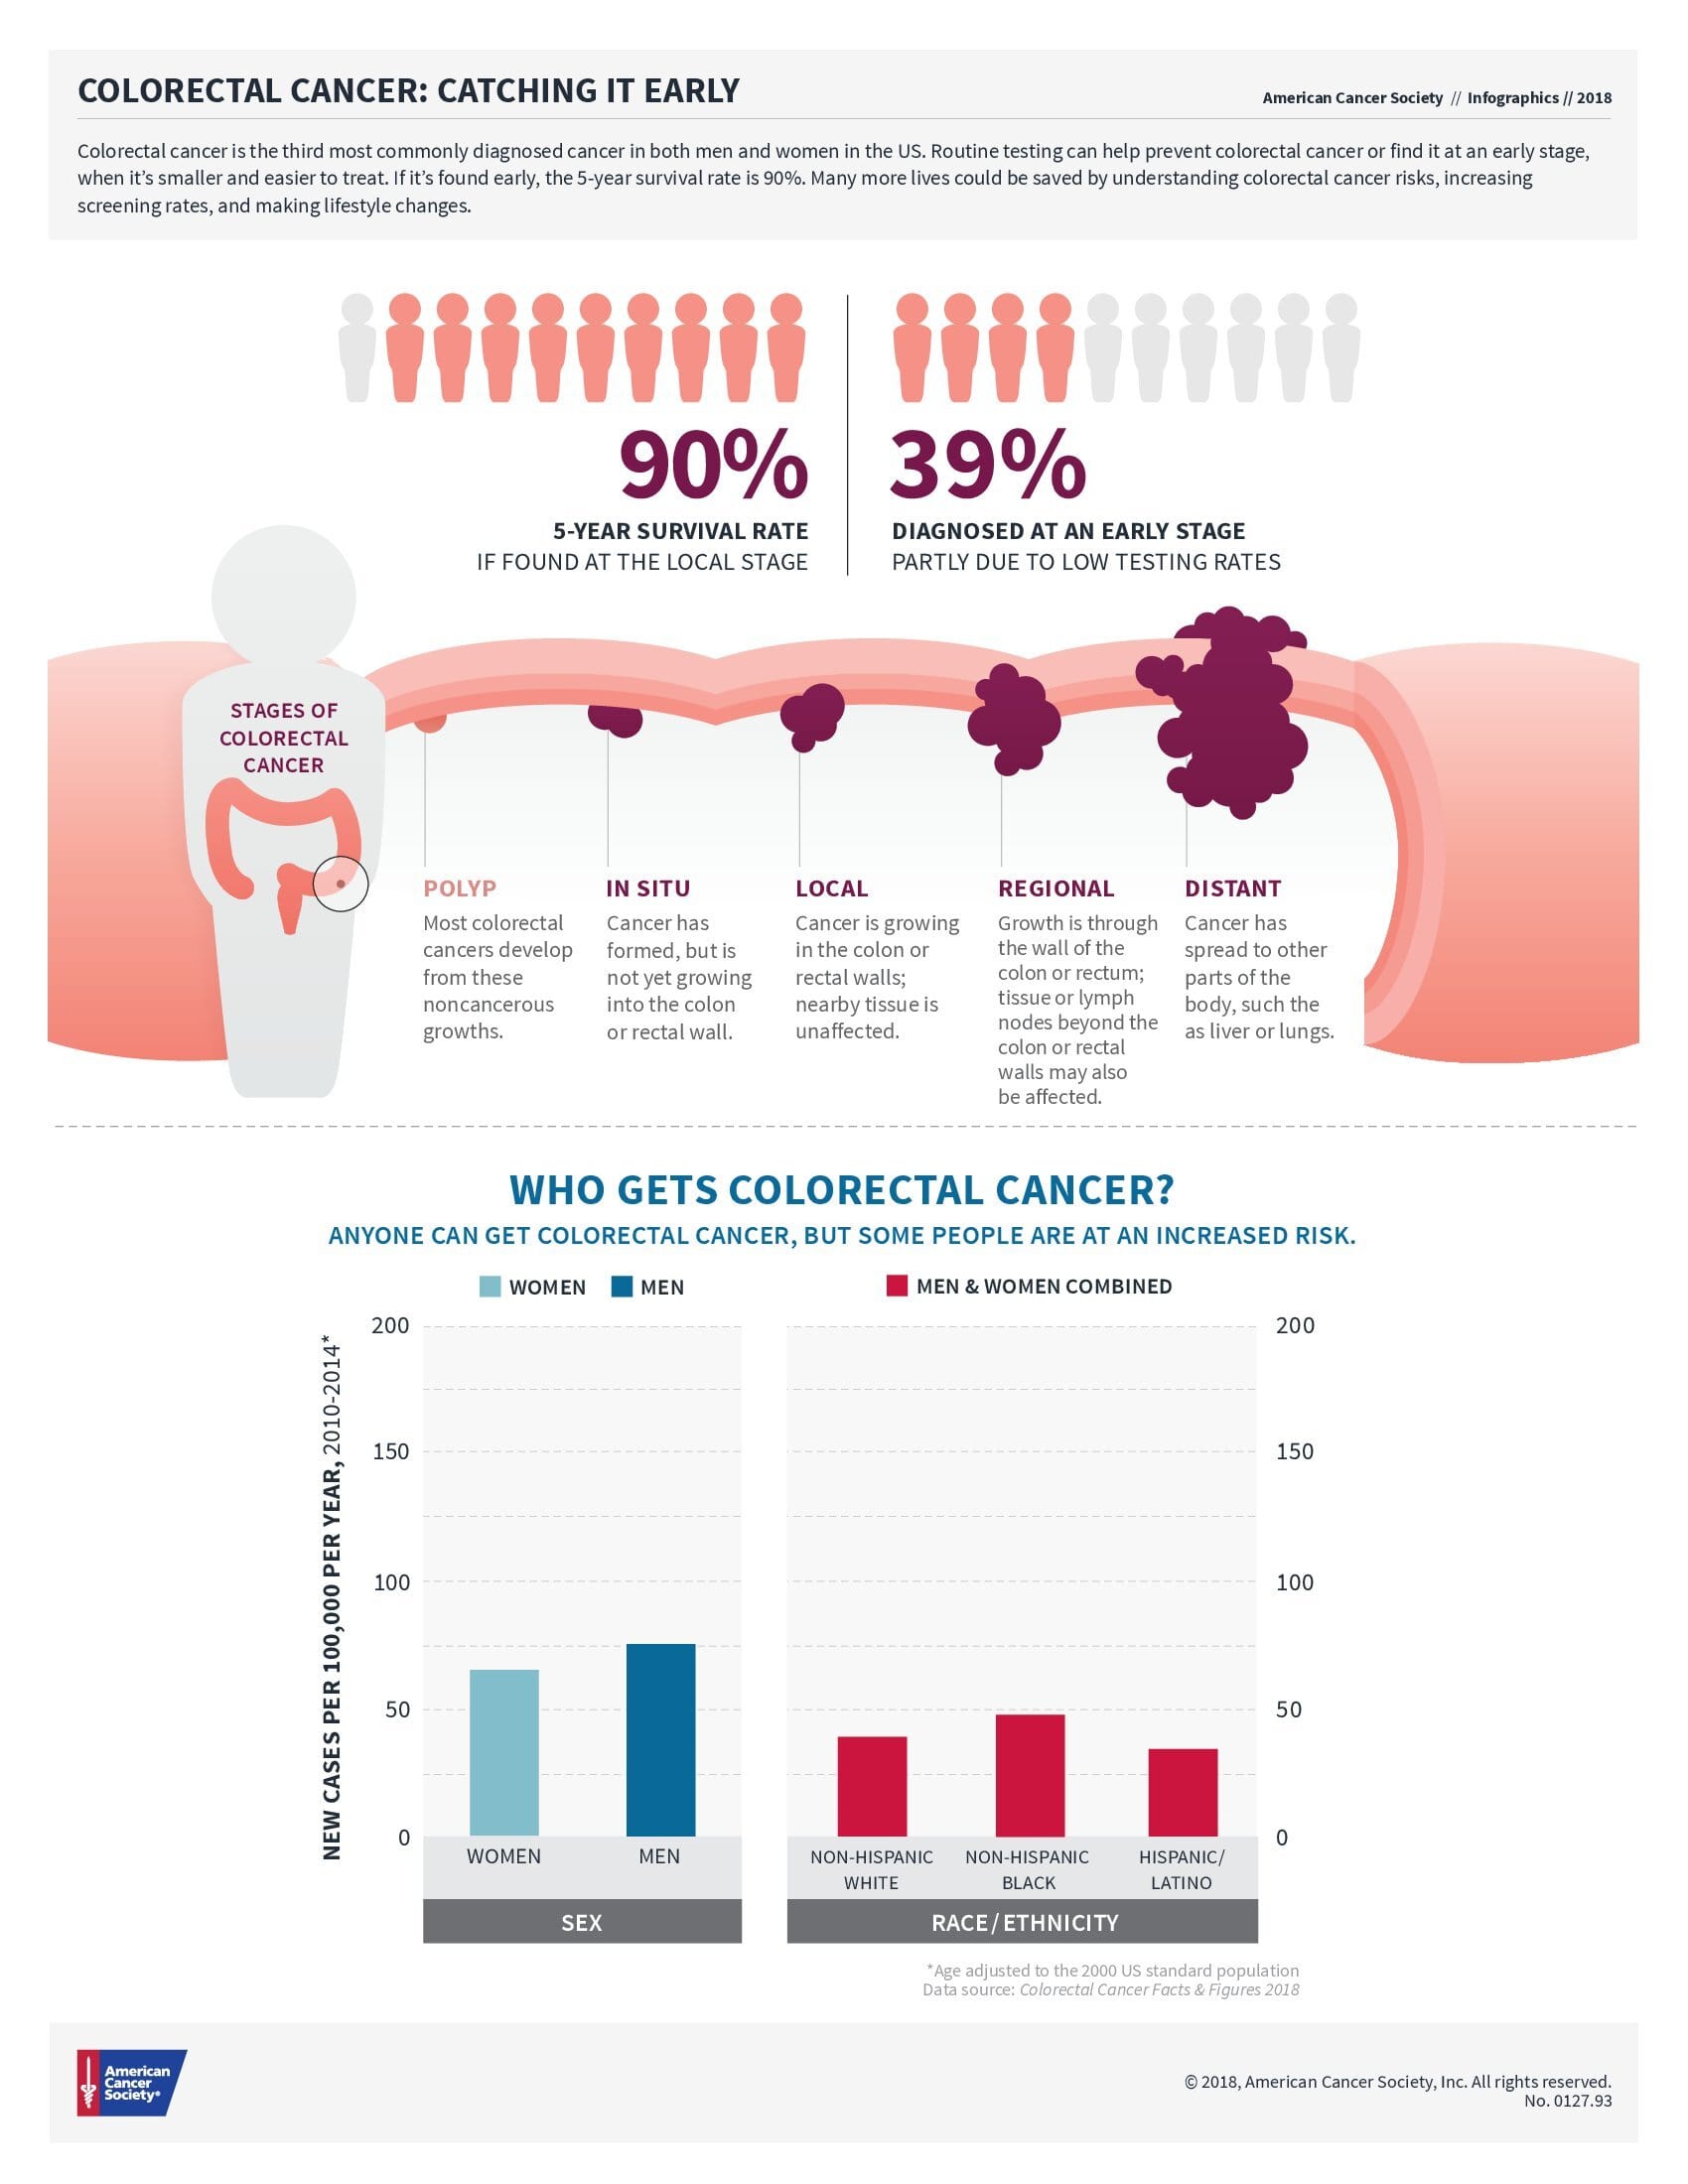 colorectal-cancer-catching-it-early-infographic-print_00001.jp